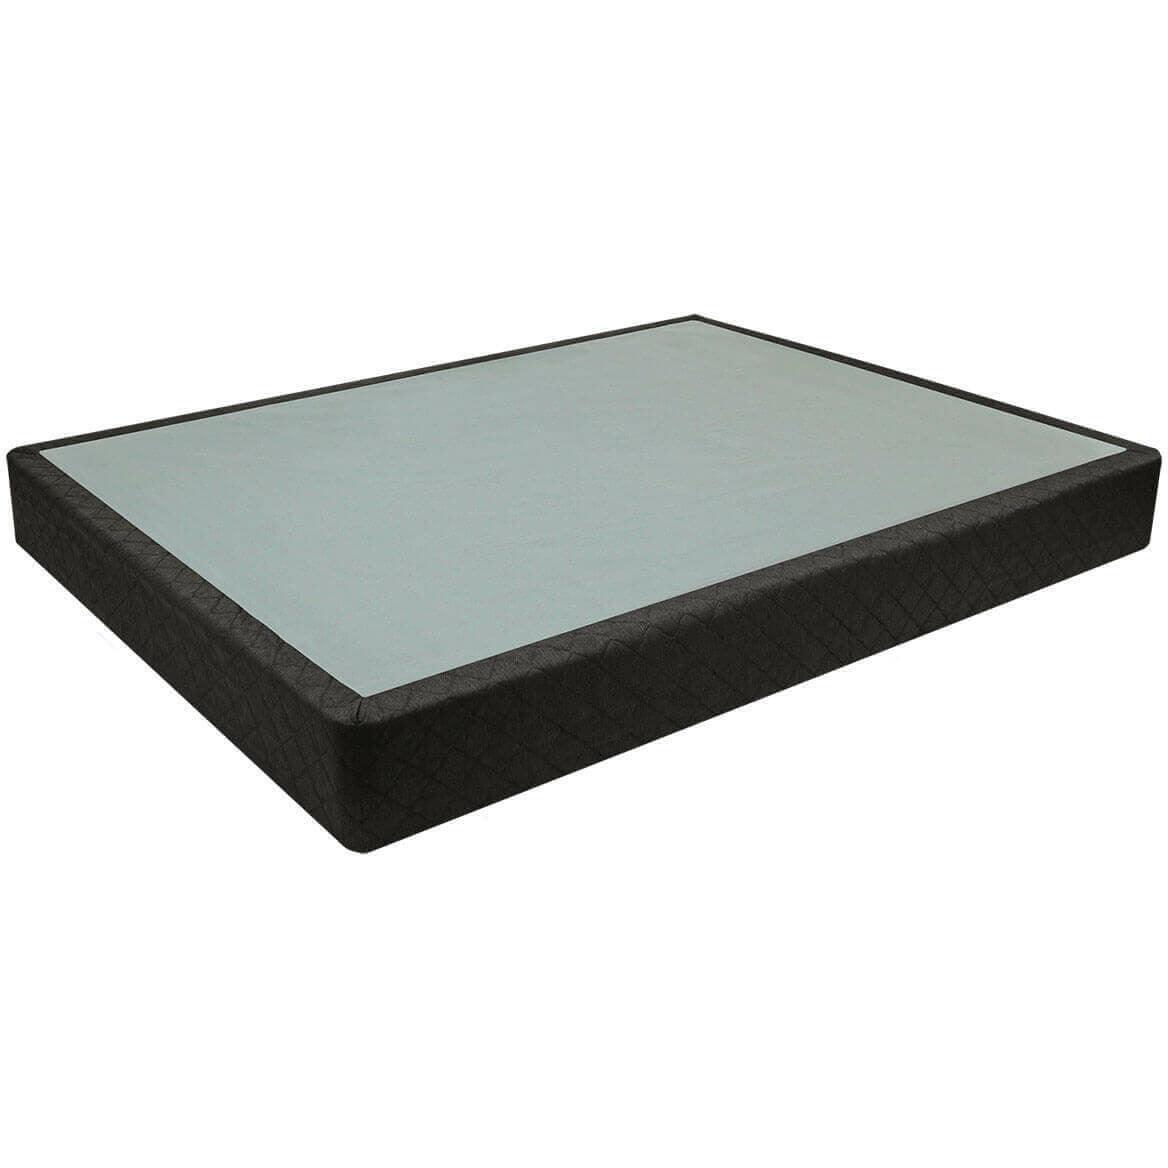 Boxspring - 9"(H) or 5"(H) - Fraser Furniture Abbotsford